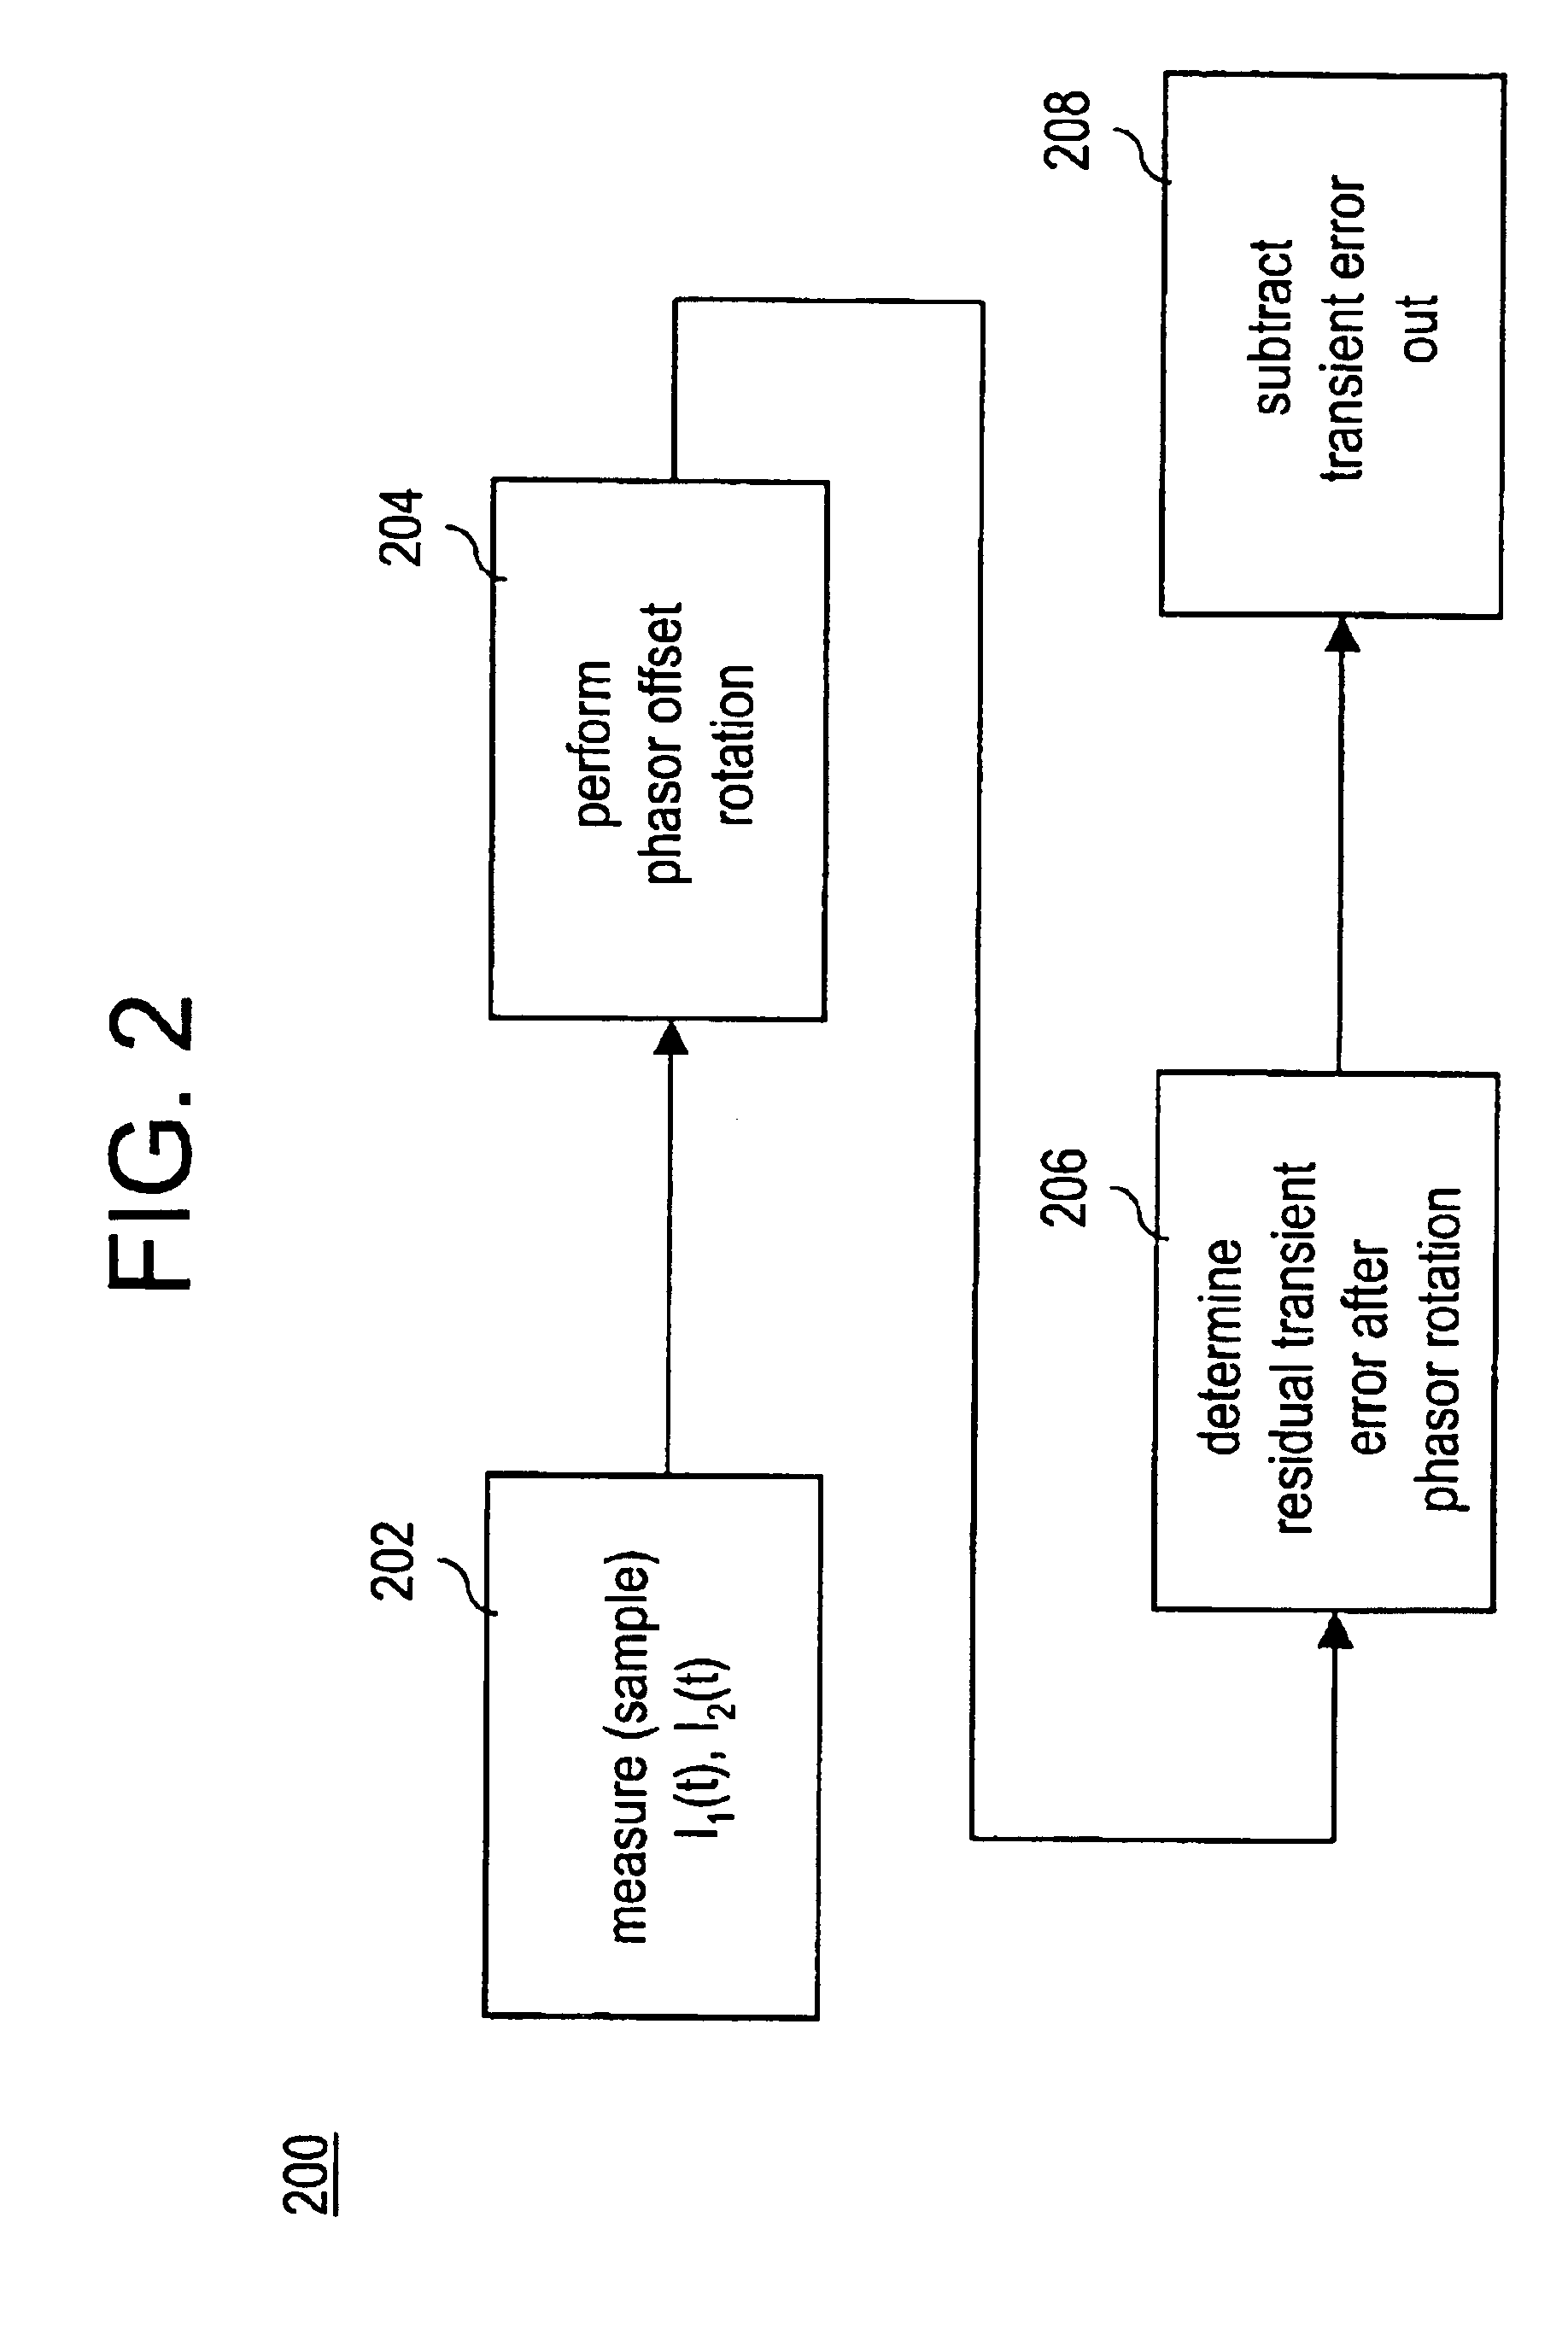 Method for canceling transient errors in unsynchronized digital current differential transmission line protection systems